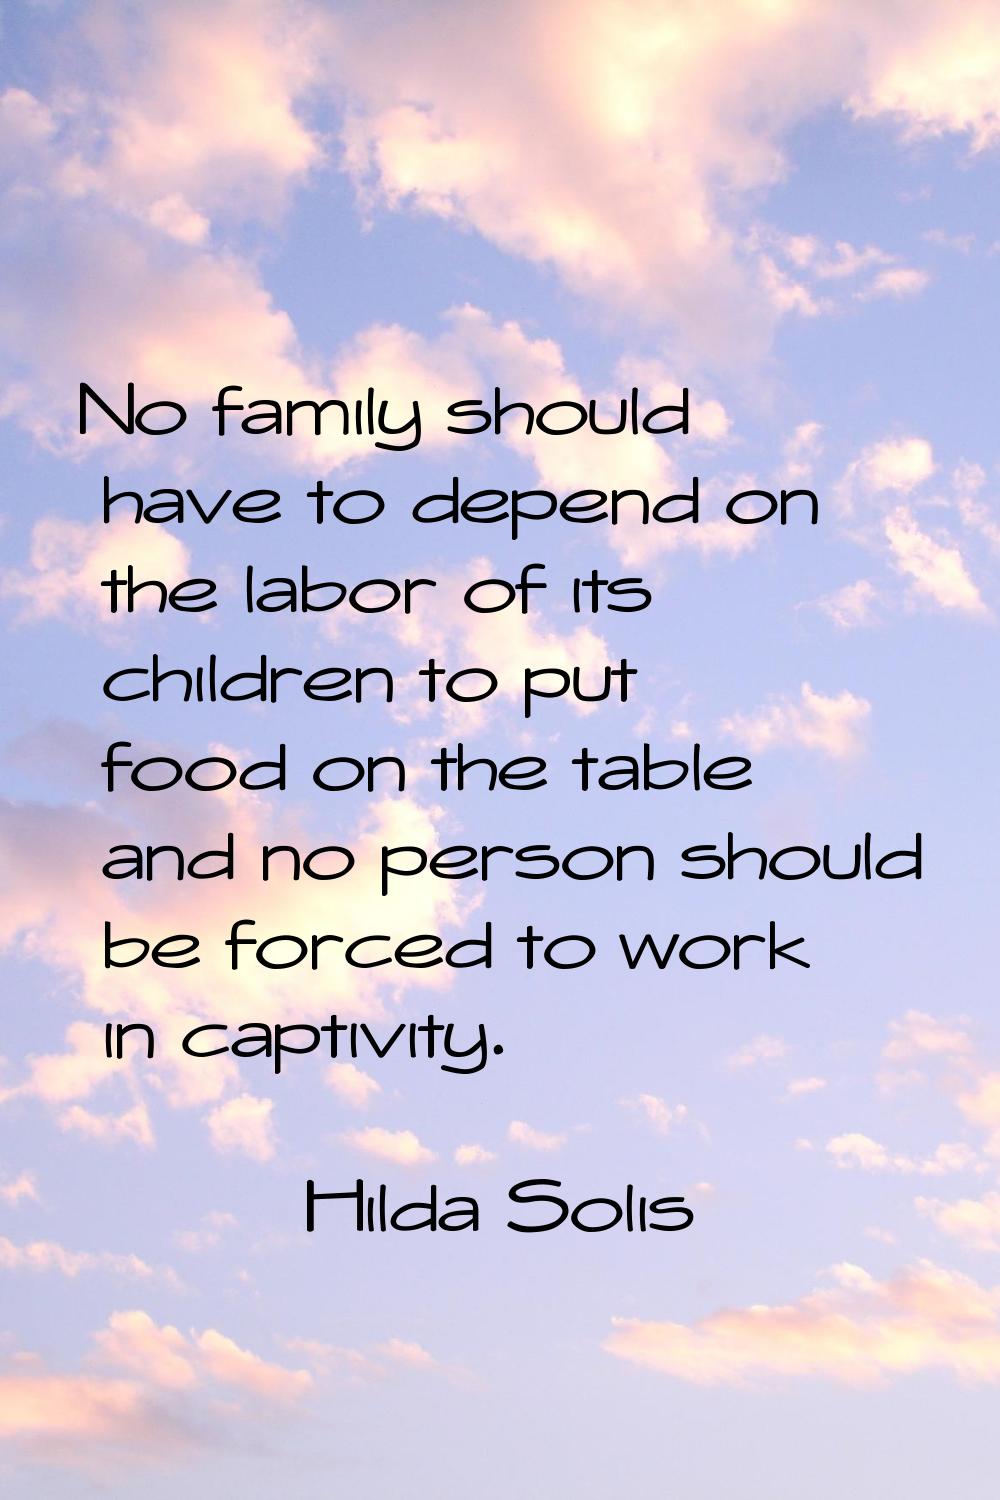 No family should have to depend on the labor of its children to put food on the table and no person